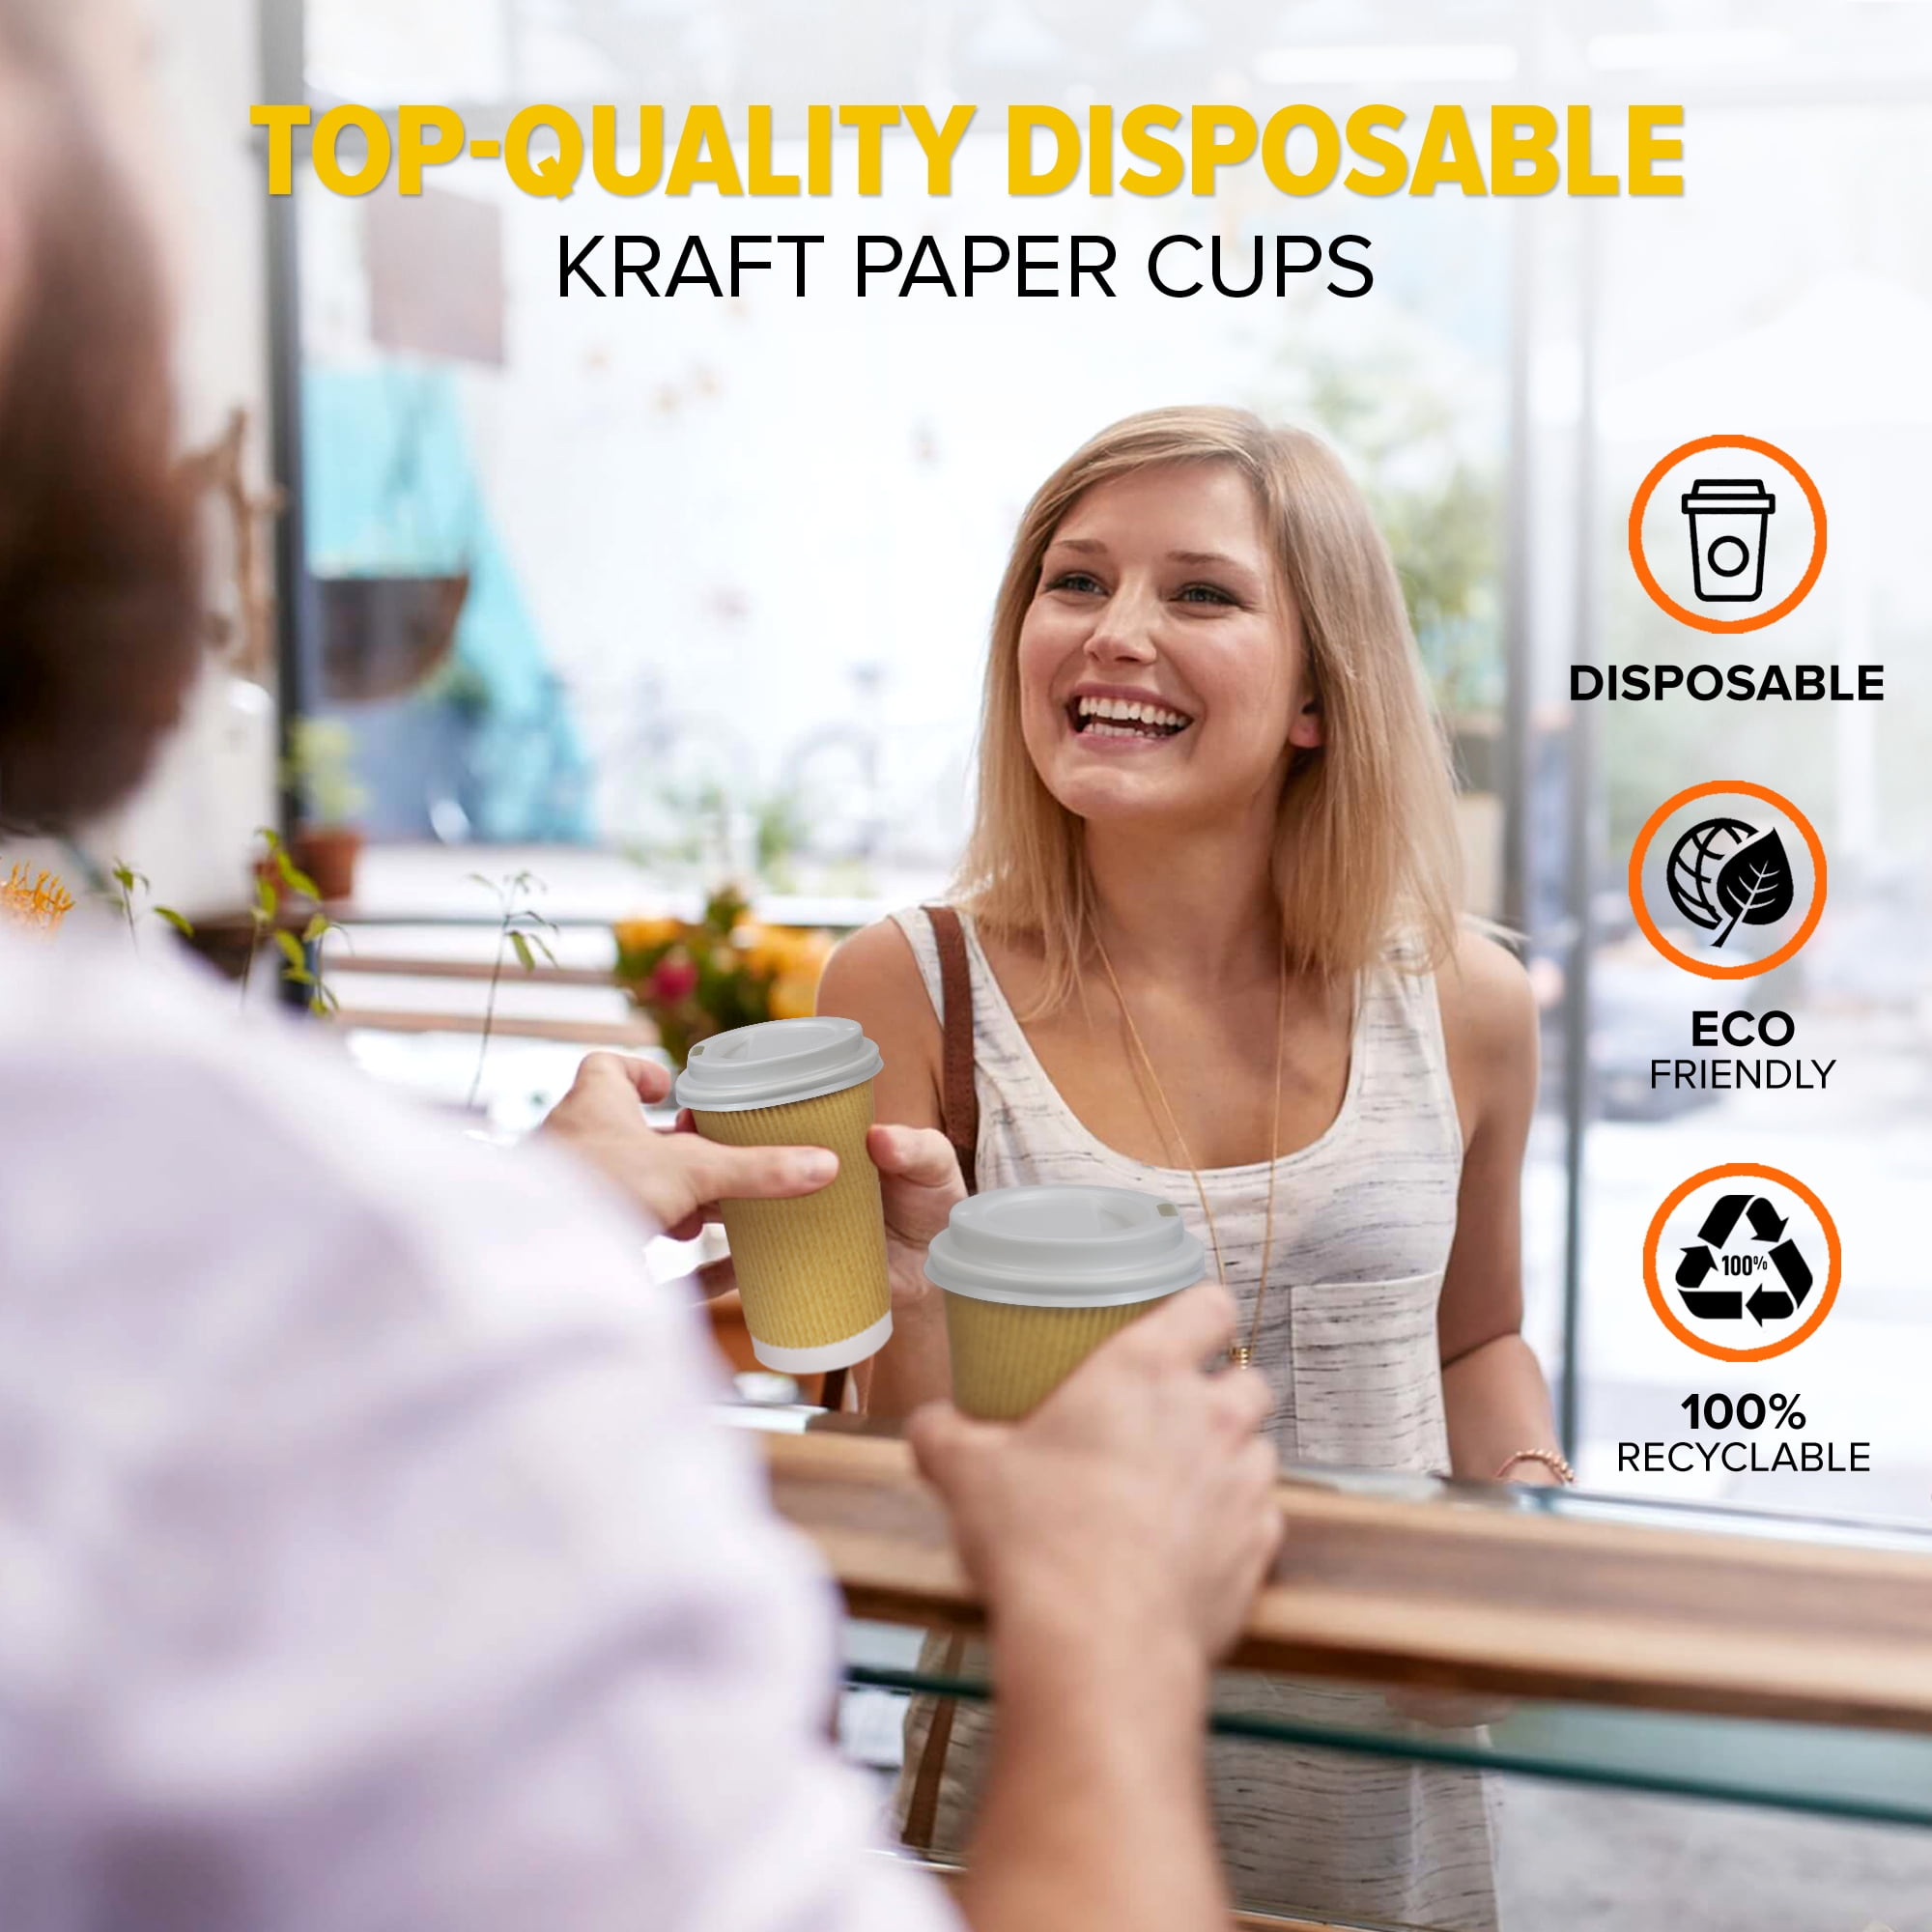 20 oz Kraft Double Wall Paper Hot Cup | 500/Case